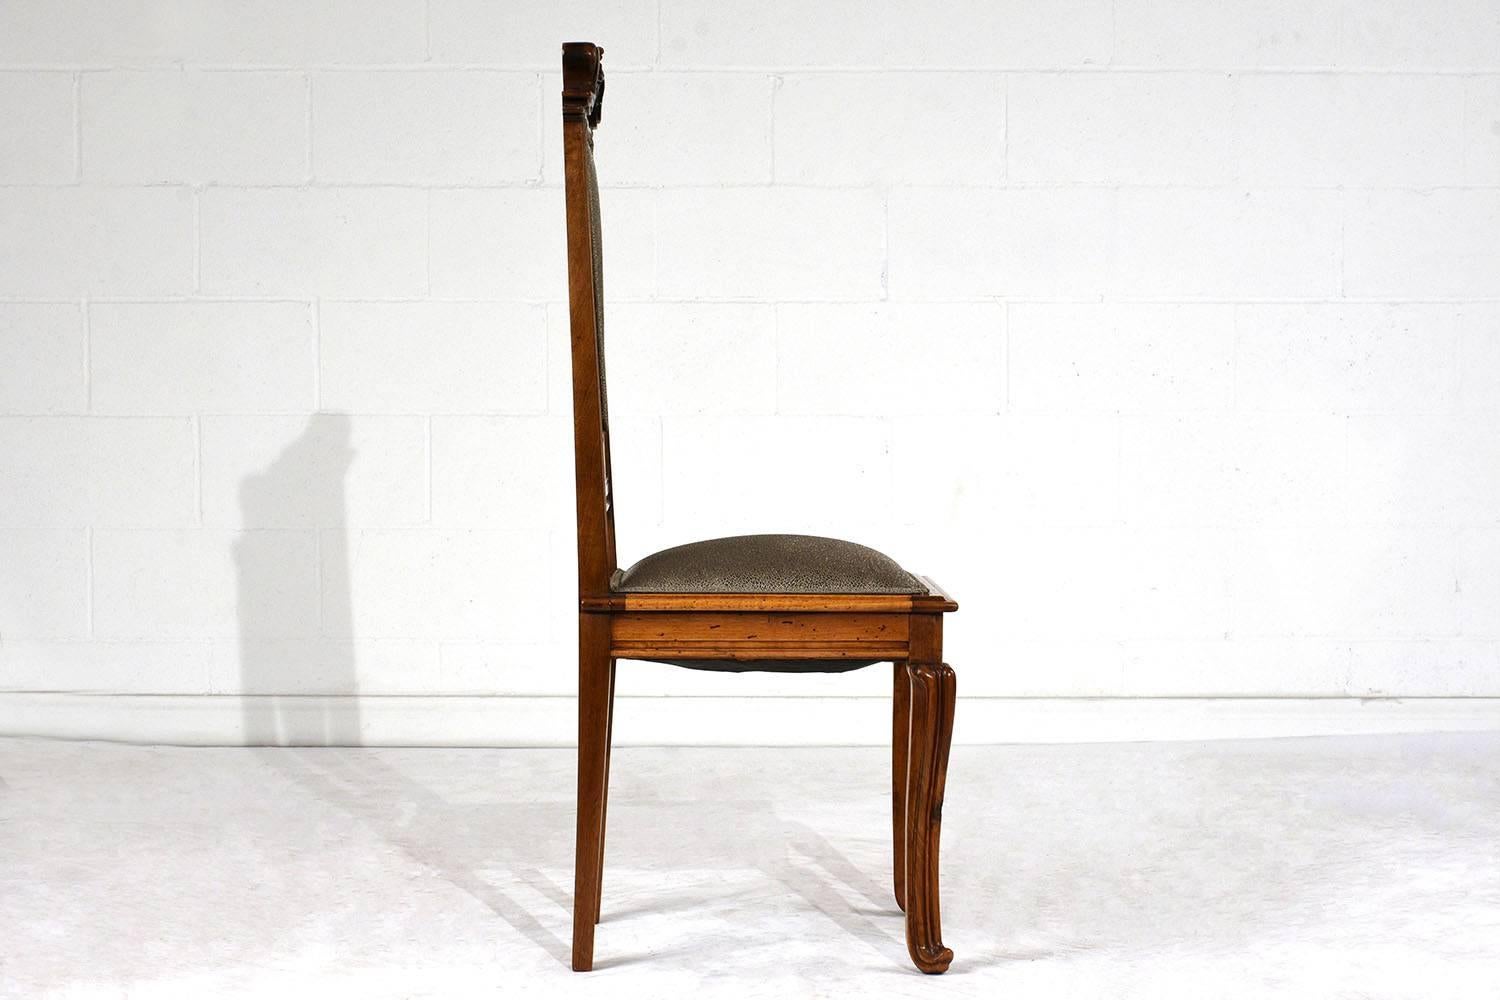 This rare 1900s Art Nouveau side chair is made is made in the manner of Louis Majorelle. The side chair features a frame made of walnut wood in its original walnut color stain and has recently been polished and waxed. This chair frame is adorned